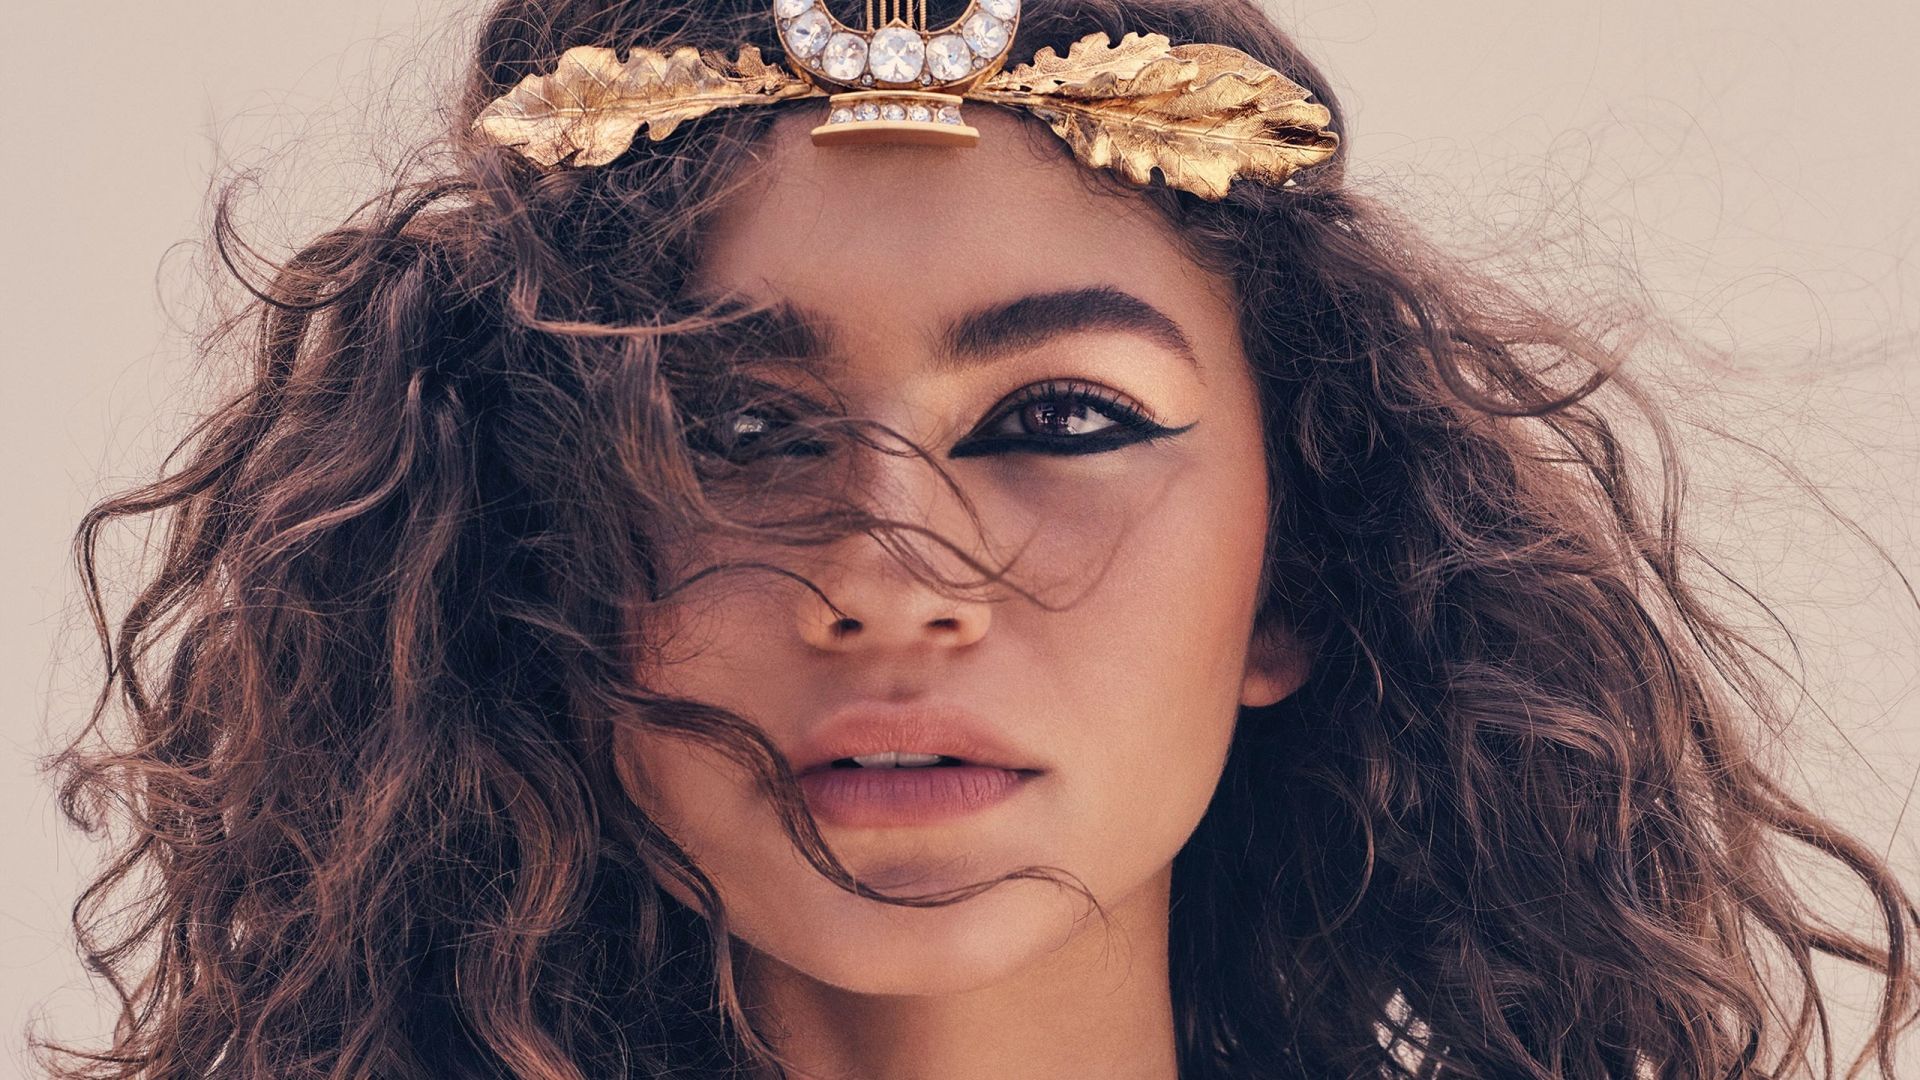 Zendaya wears a gold leaf headband and has her curly hair blowing in the wind. - Zendaya